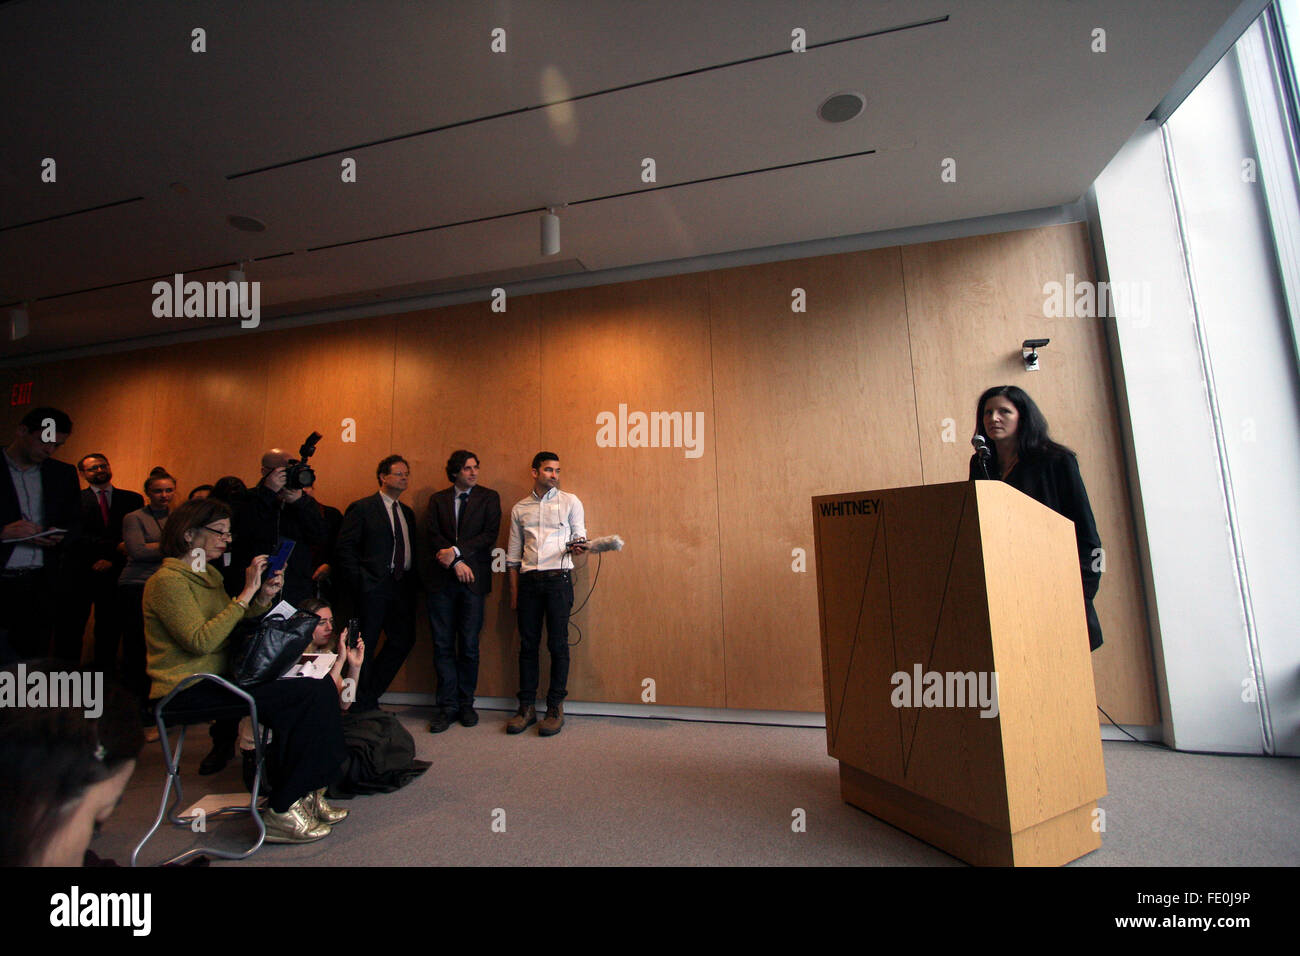 New York City, NY, USA. 3rd February, 2016. Laura Poitras speaks to members of the press during a preview of her first solo exhibition, Astro Noise, at the Whitney Museum of American Art in New York City on February 3, 2016.   Poitras, a filmmaker, artist and journalist best known for helping to break the Edward Snowden story Drone Program, Guantanamo Bay Prison, occupation and torture. Credit:  Adam Stoltman/Alamy Live News Stock Photo